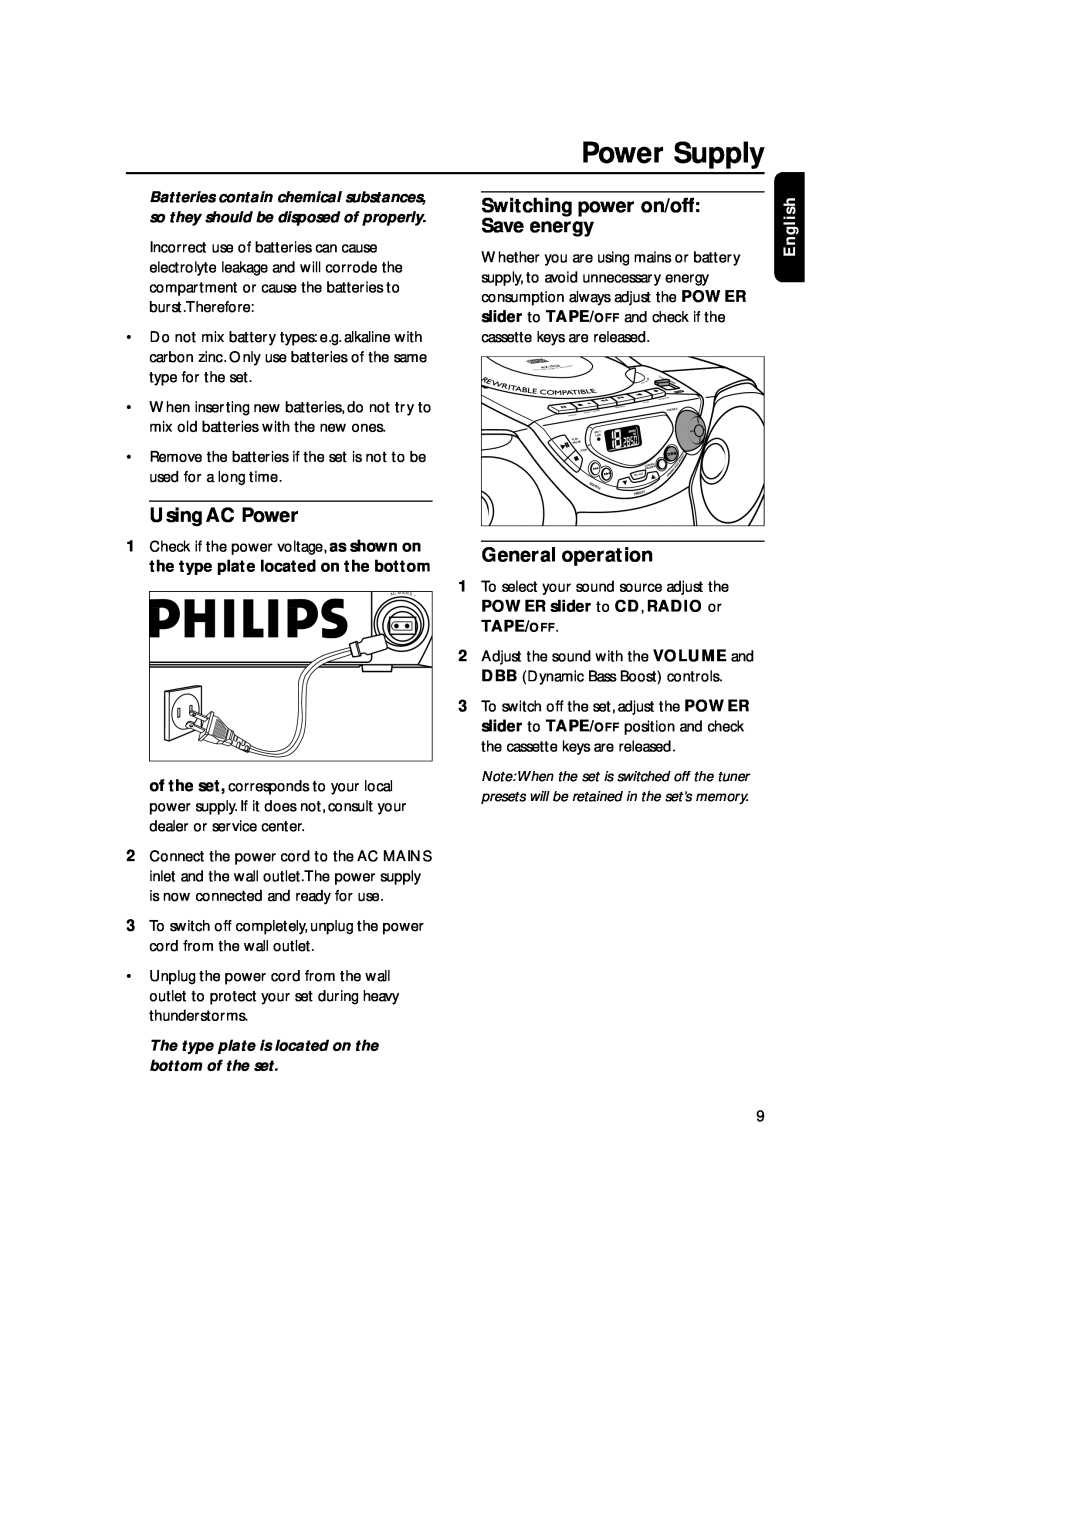 Philips AZ 1018 manual Power Supply, Using AC Power, Switching power on/off Save energy, General operation, English 